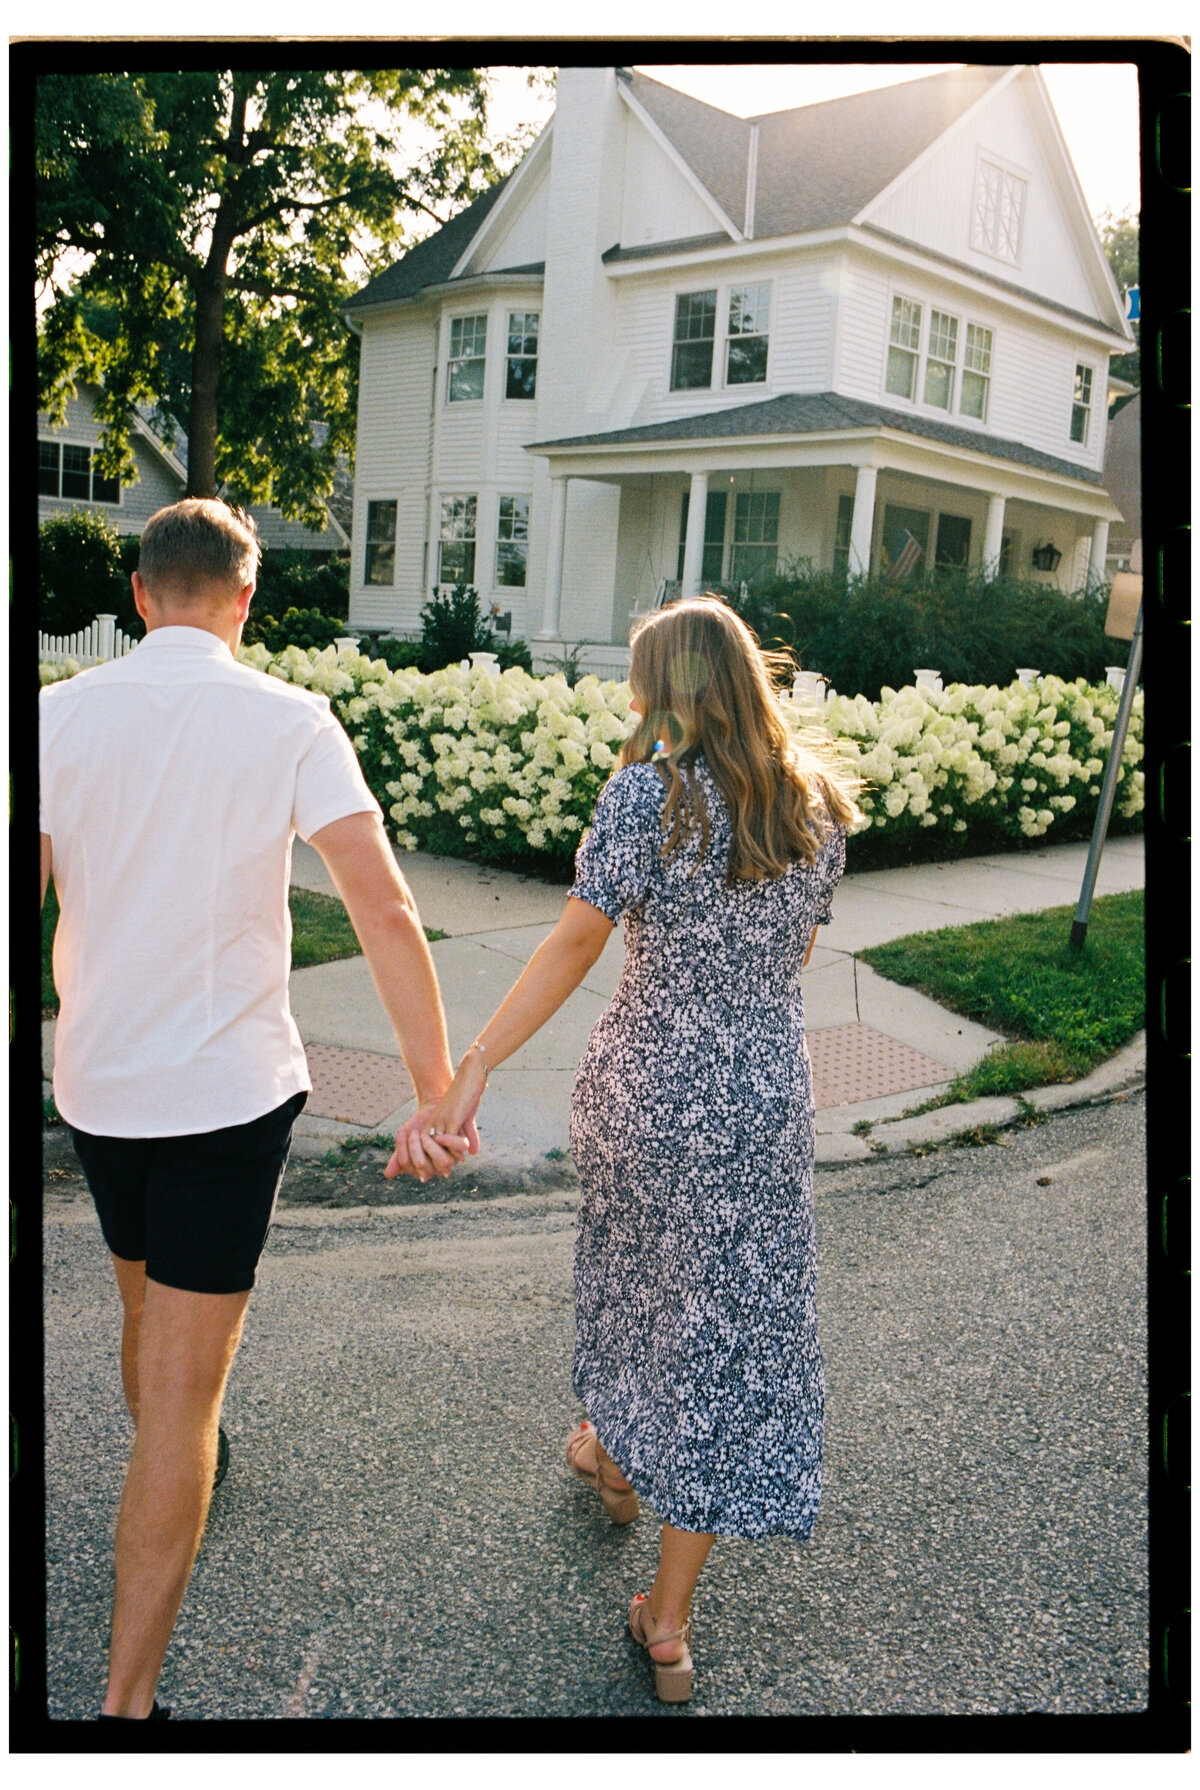 Excelsior-Minnesota-Summer-Engagement-Session-Clever-Disarray-22